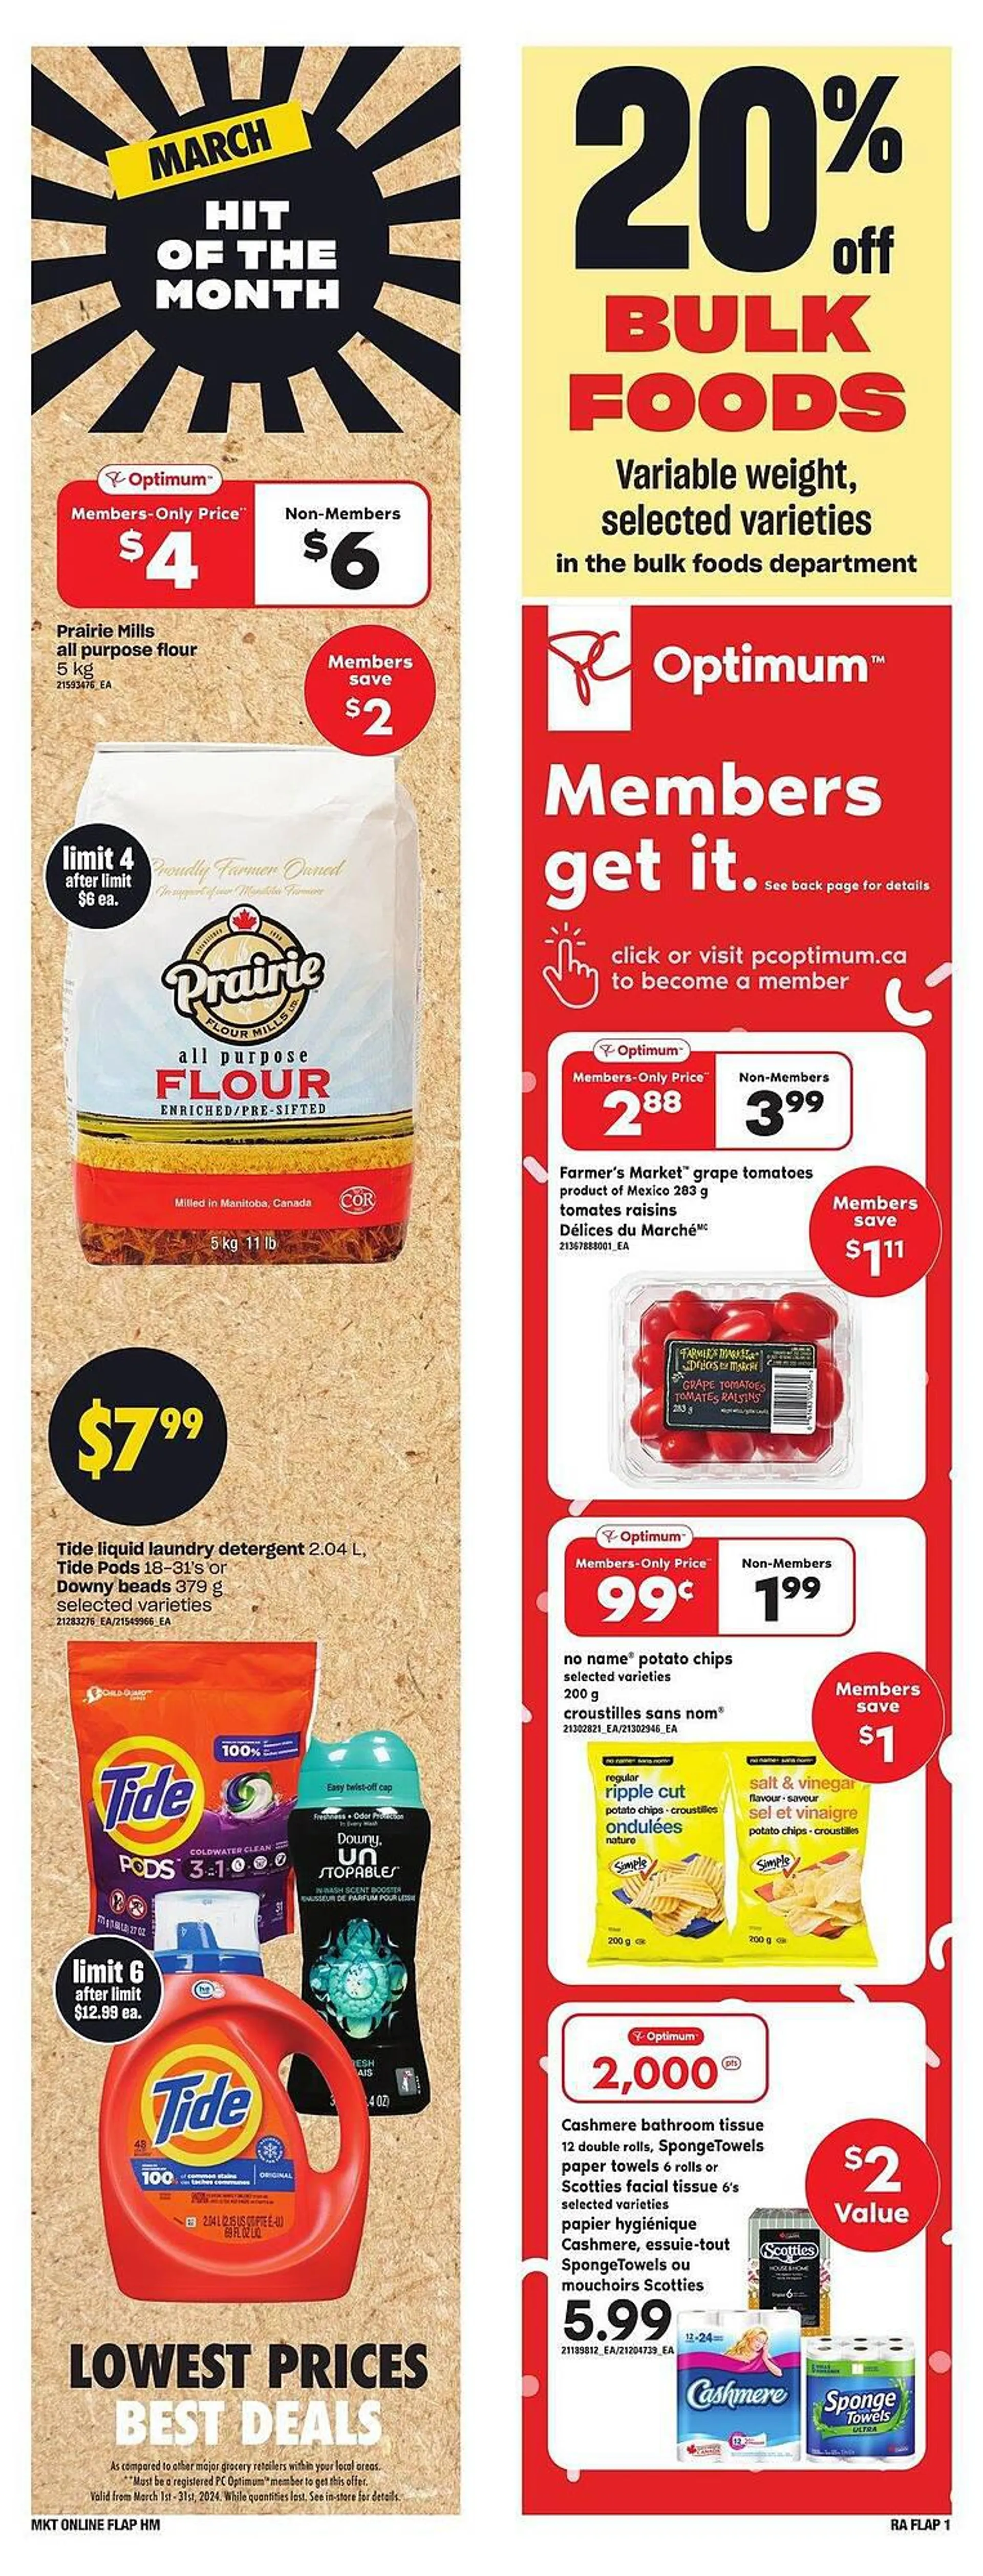 Atlantic Superstore flyer from March 7 to April 3 2024 - flyer page 